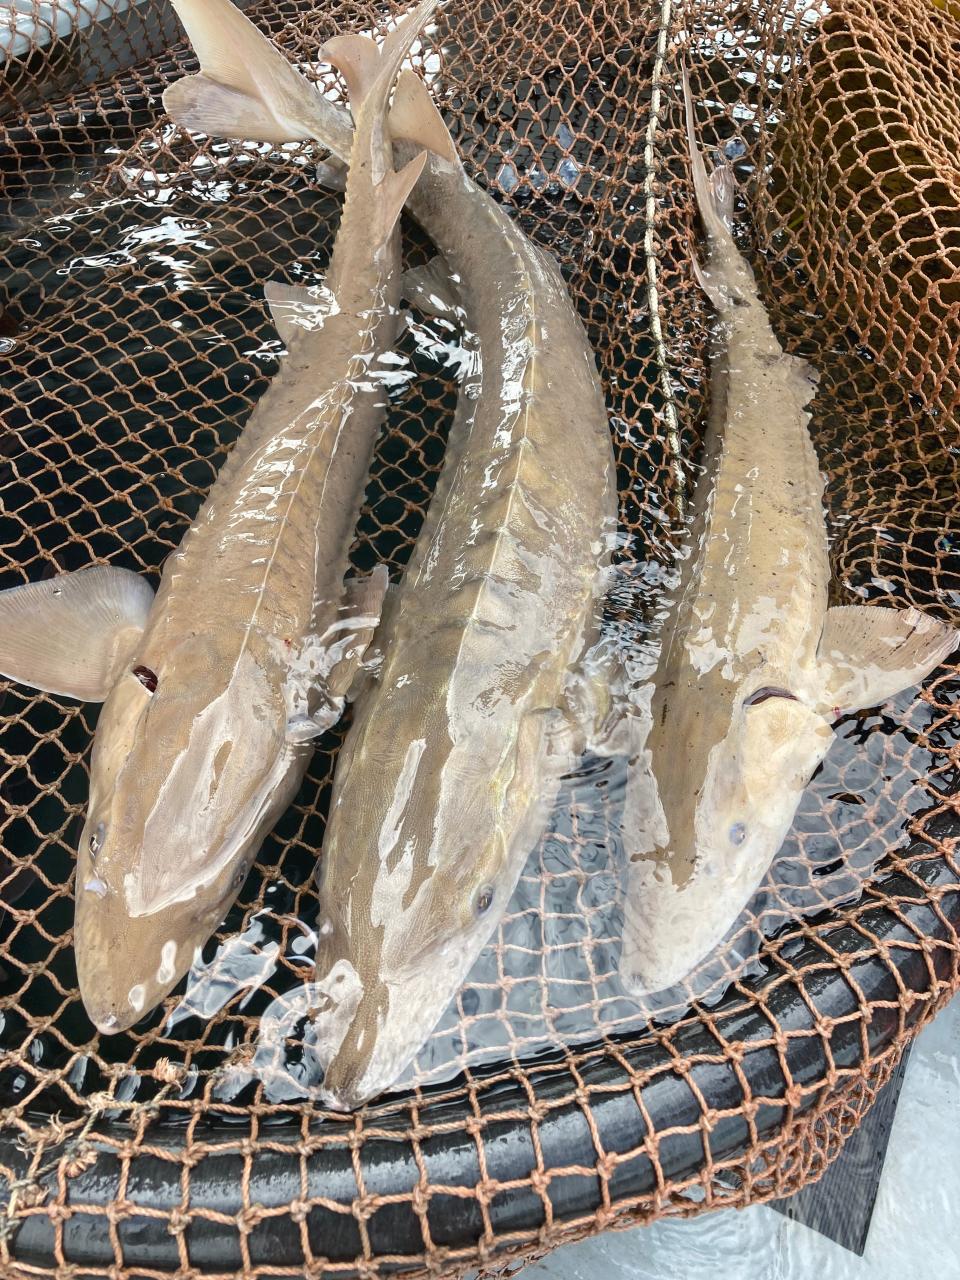 Lake sturgeons caught by members of the Michigan Department of Natural Resources.